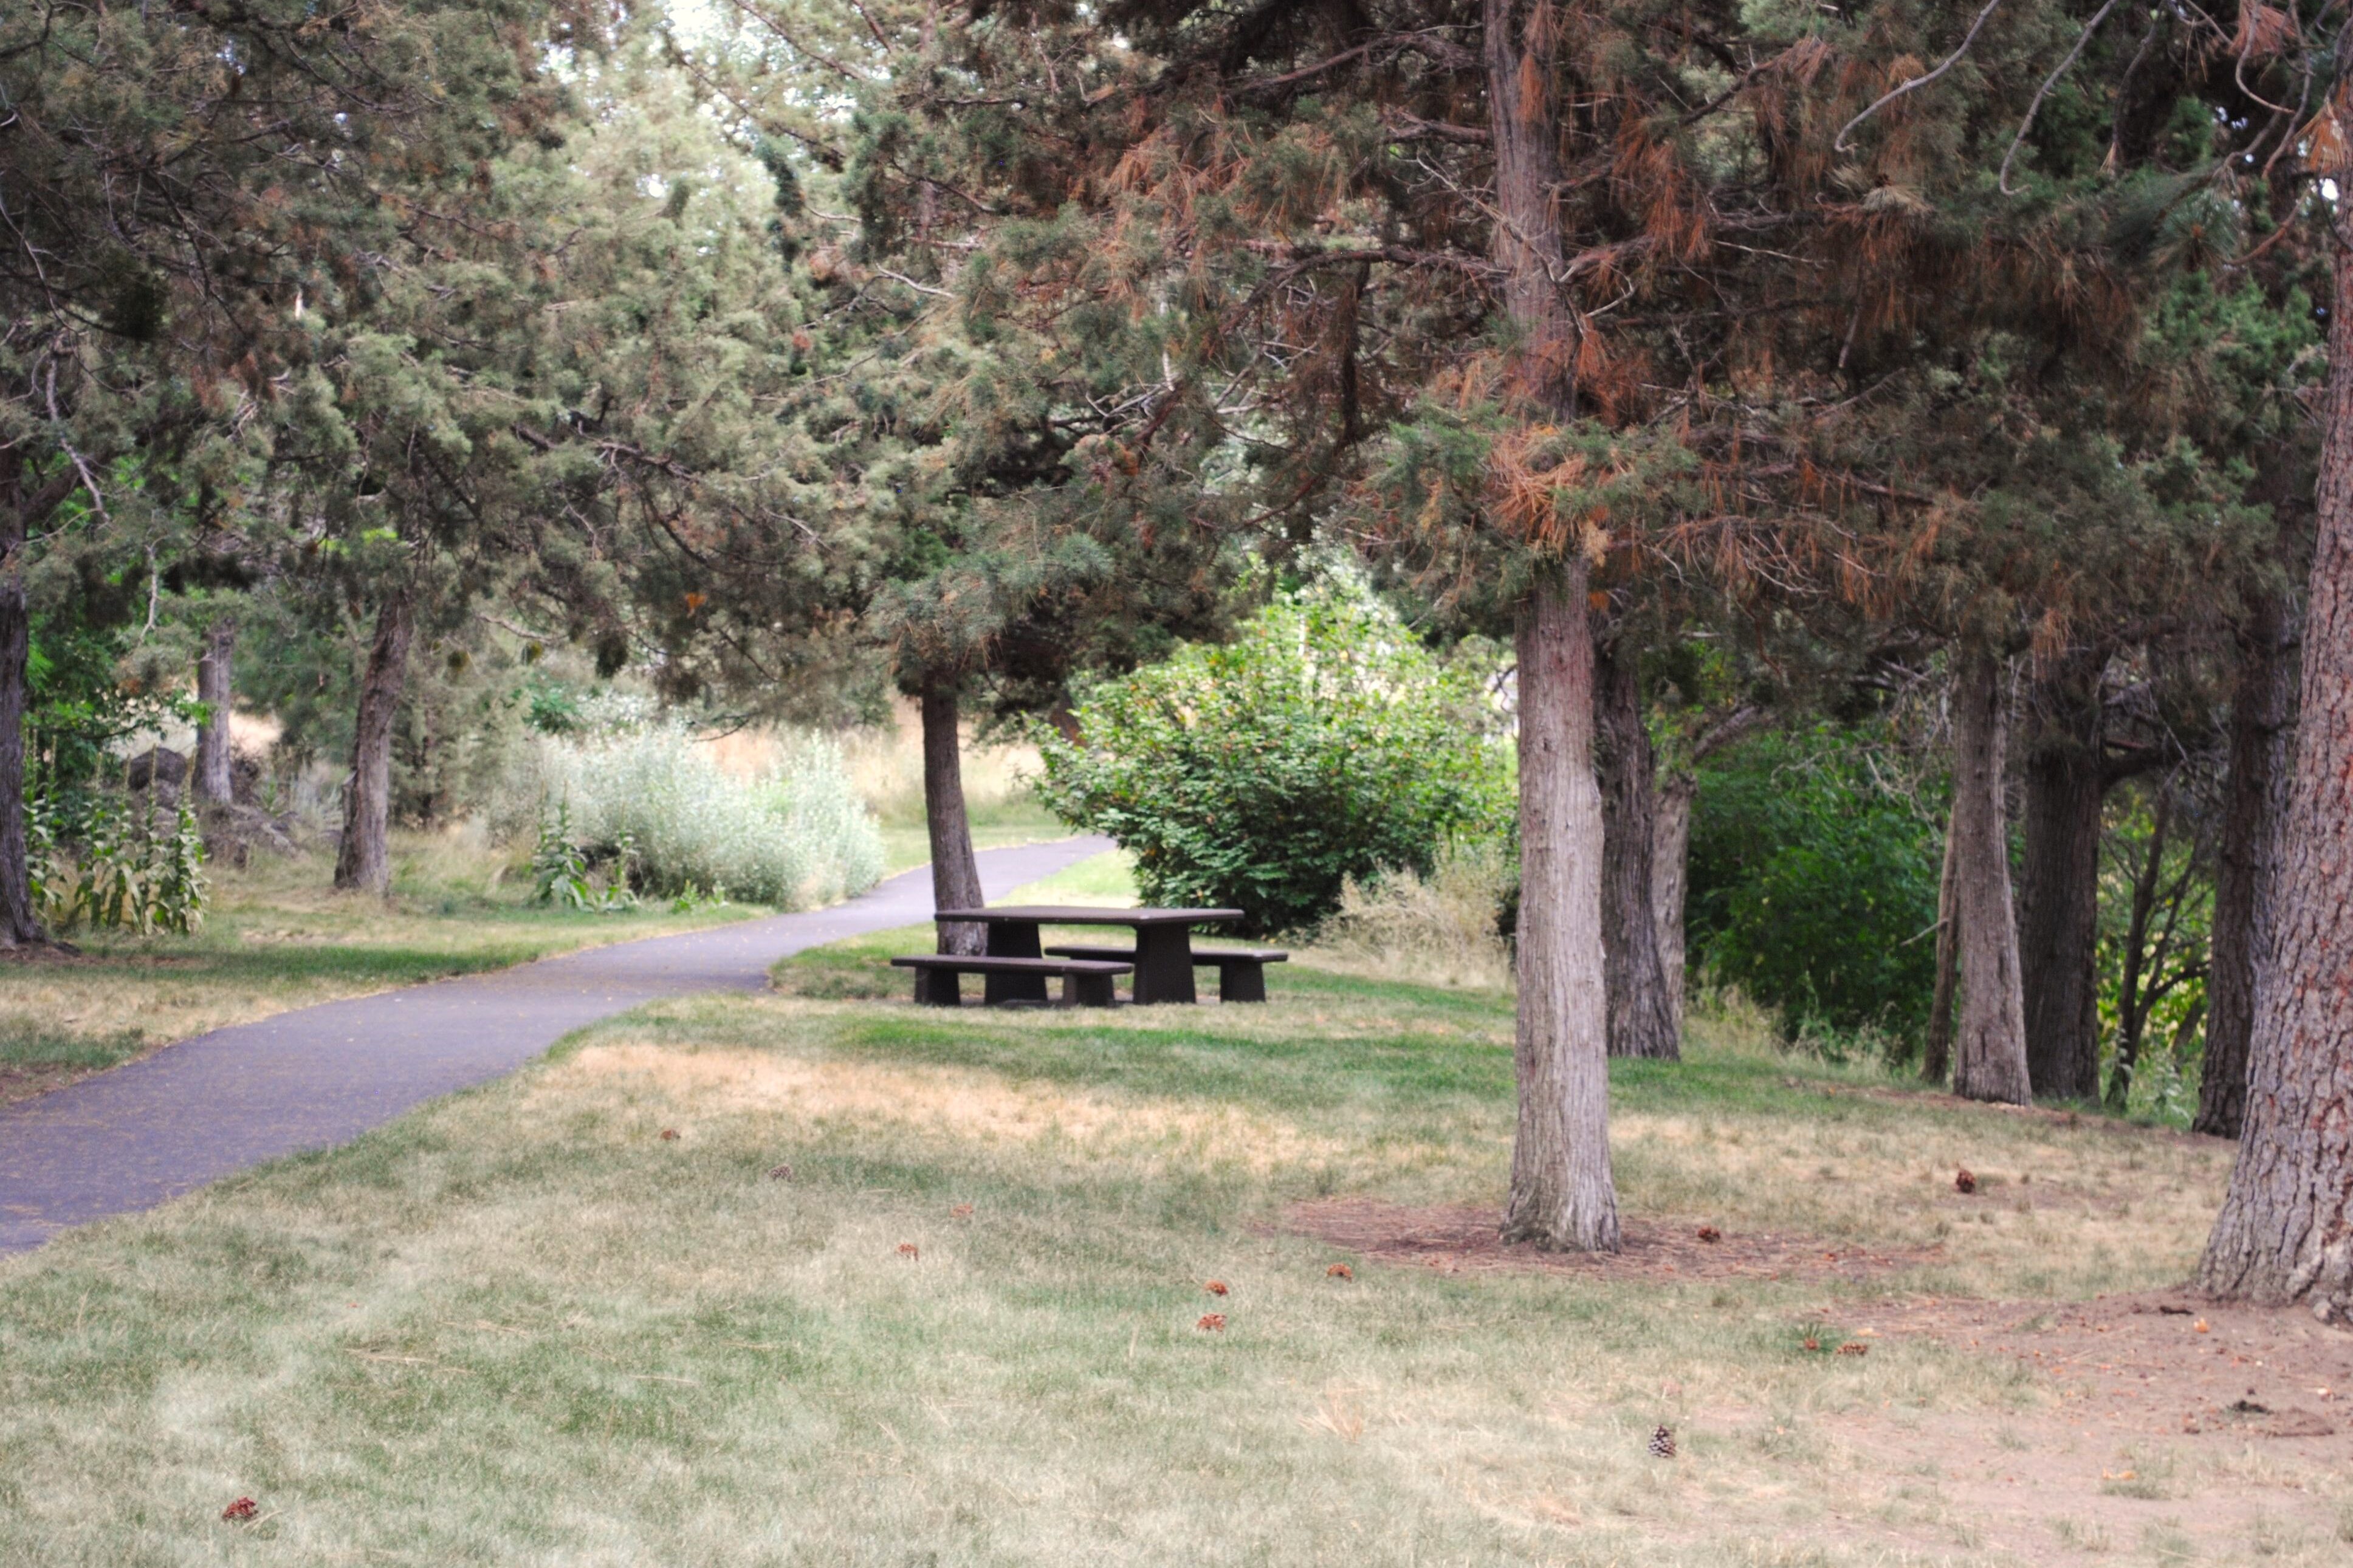 A view of the Sawyer Park trail and picnic table in the grassy area